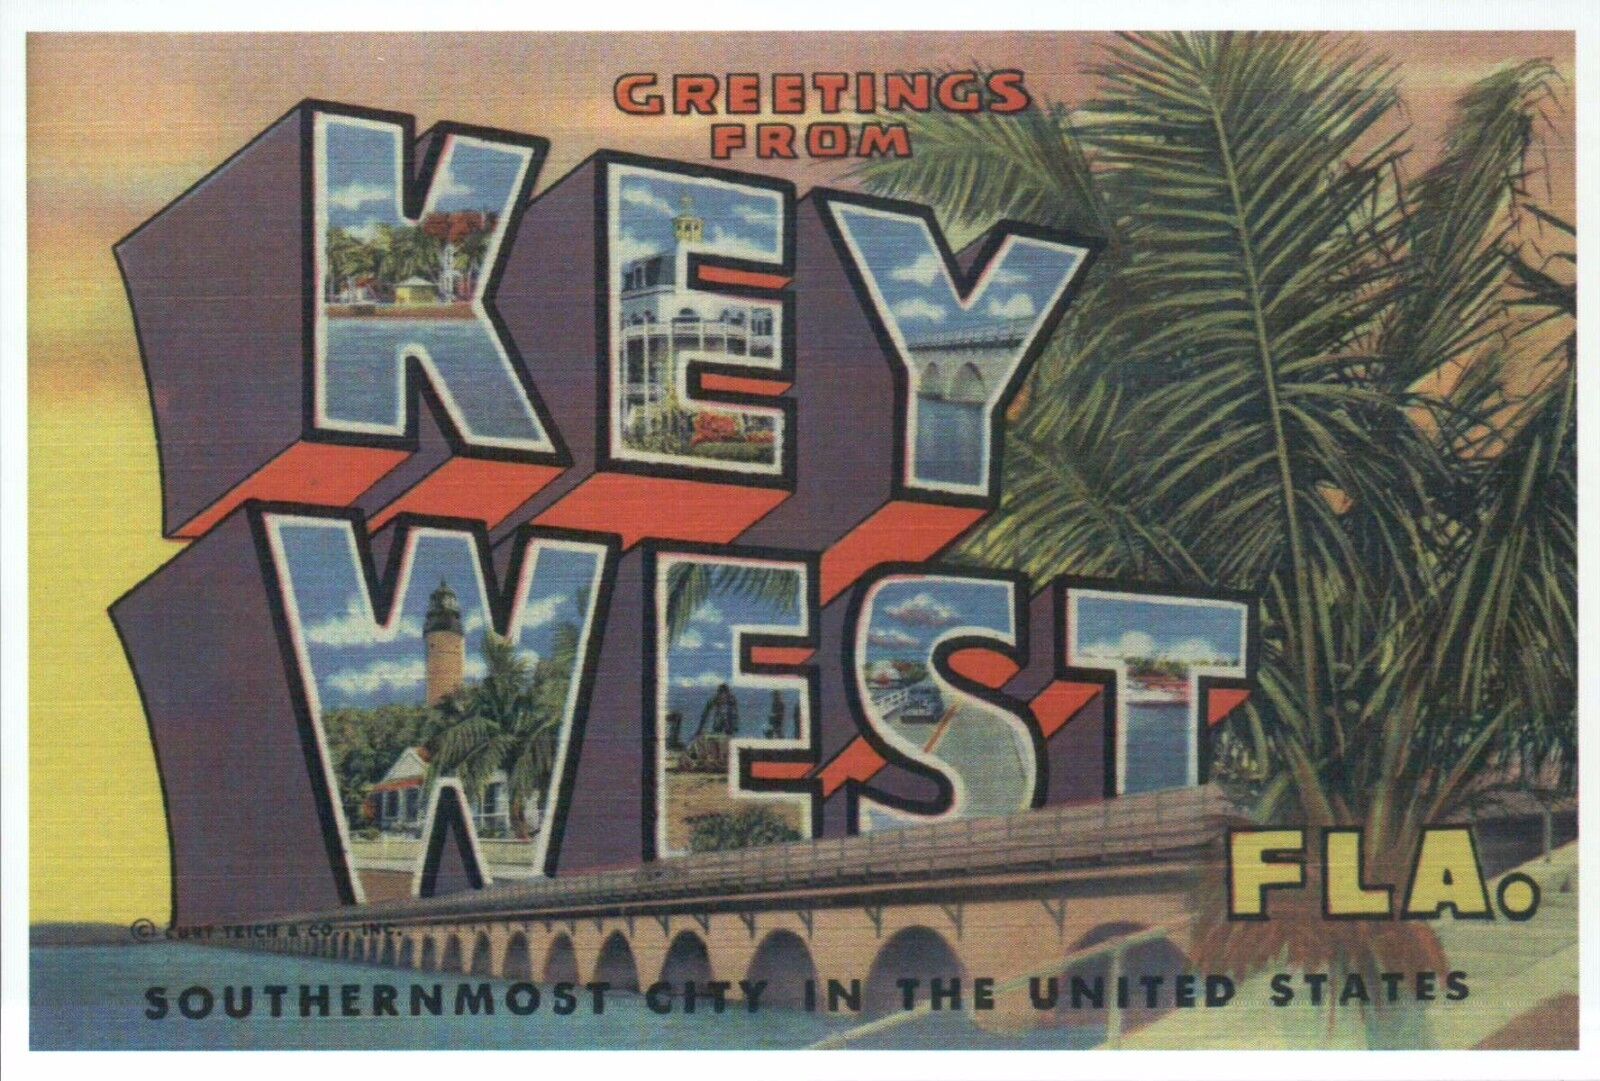 Greetings from Key West Florida Southernmost City - Modern Large Letter Postcard